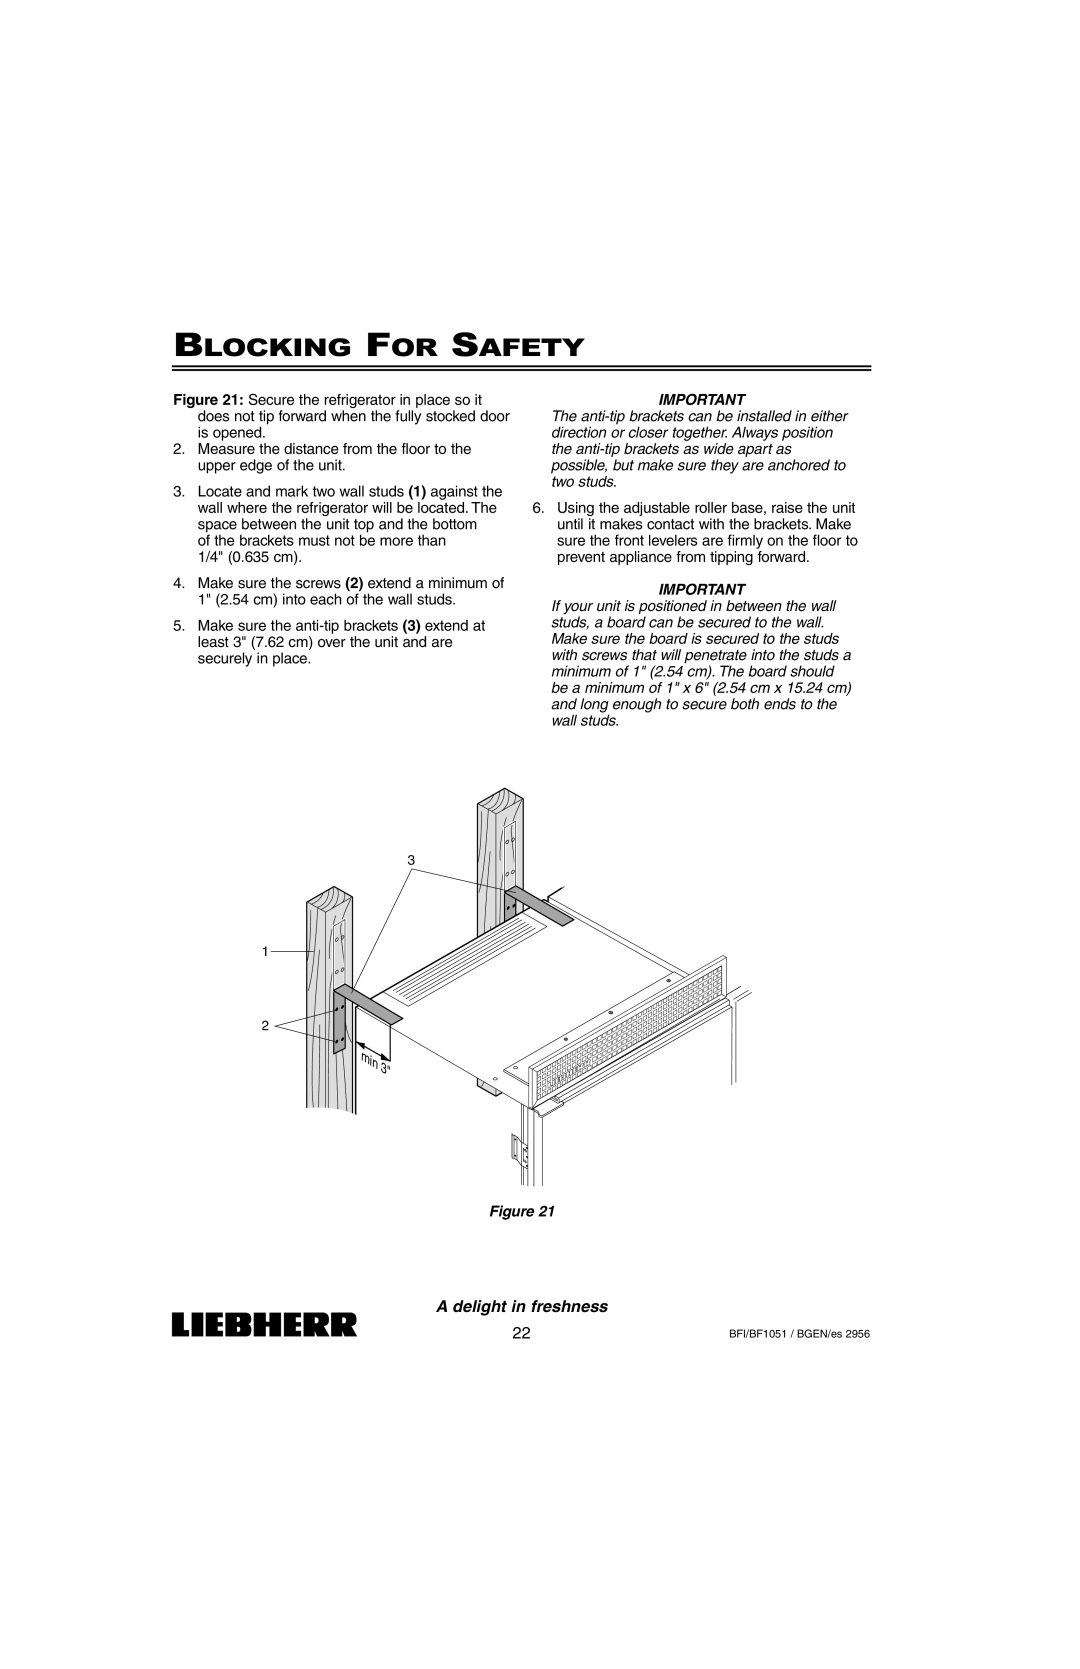 Liebherr BFI1051, BF1051 installation instructions Blocking For Safety, A delight in freshness, Figure 